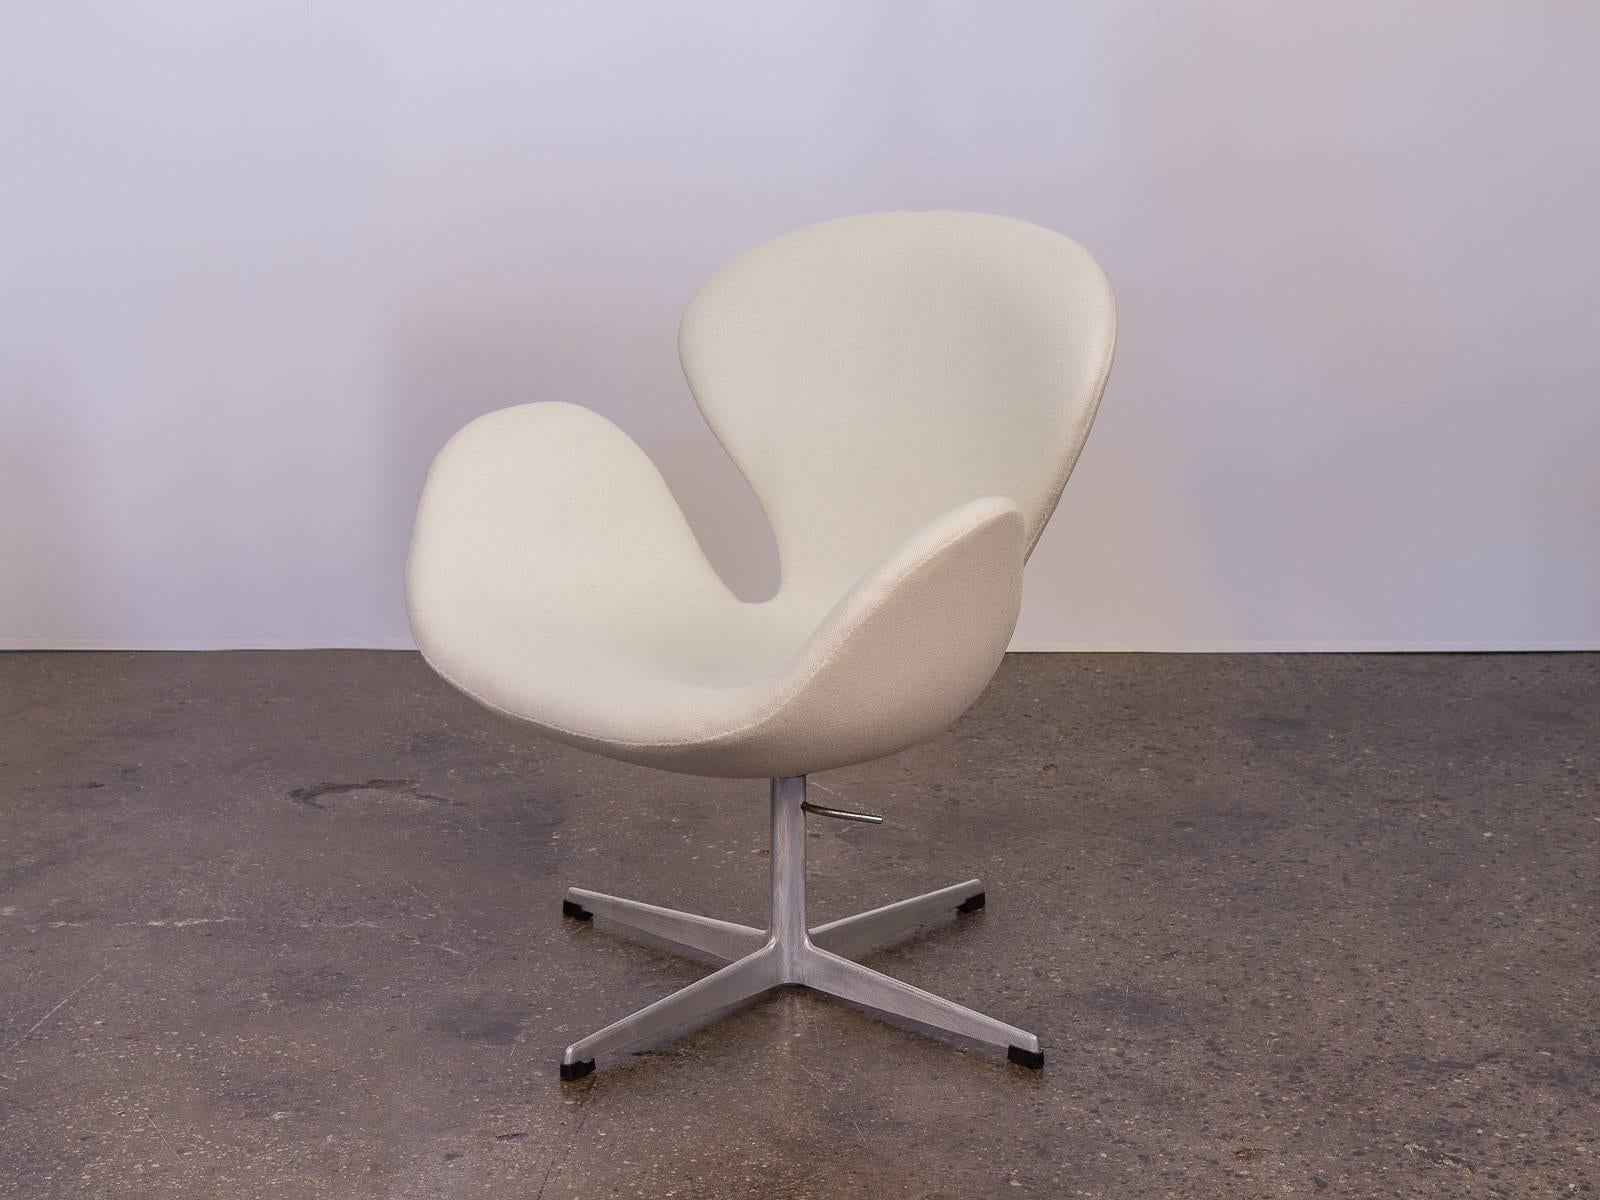 The iconic Swan chair designed by Arne Jacobsen in 1958. Attractive, ergonomic curves designed to sheathe it's sitter and follow resting limbs. Acquired from the original owner who purchased in the early 1960s. Meticulously upholstered in a creamy